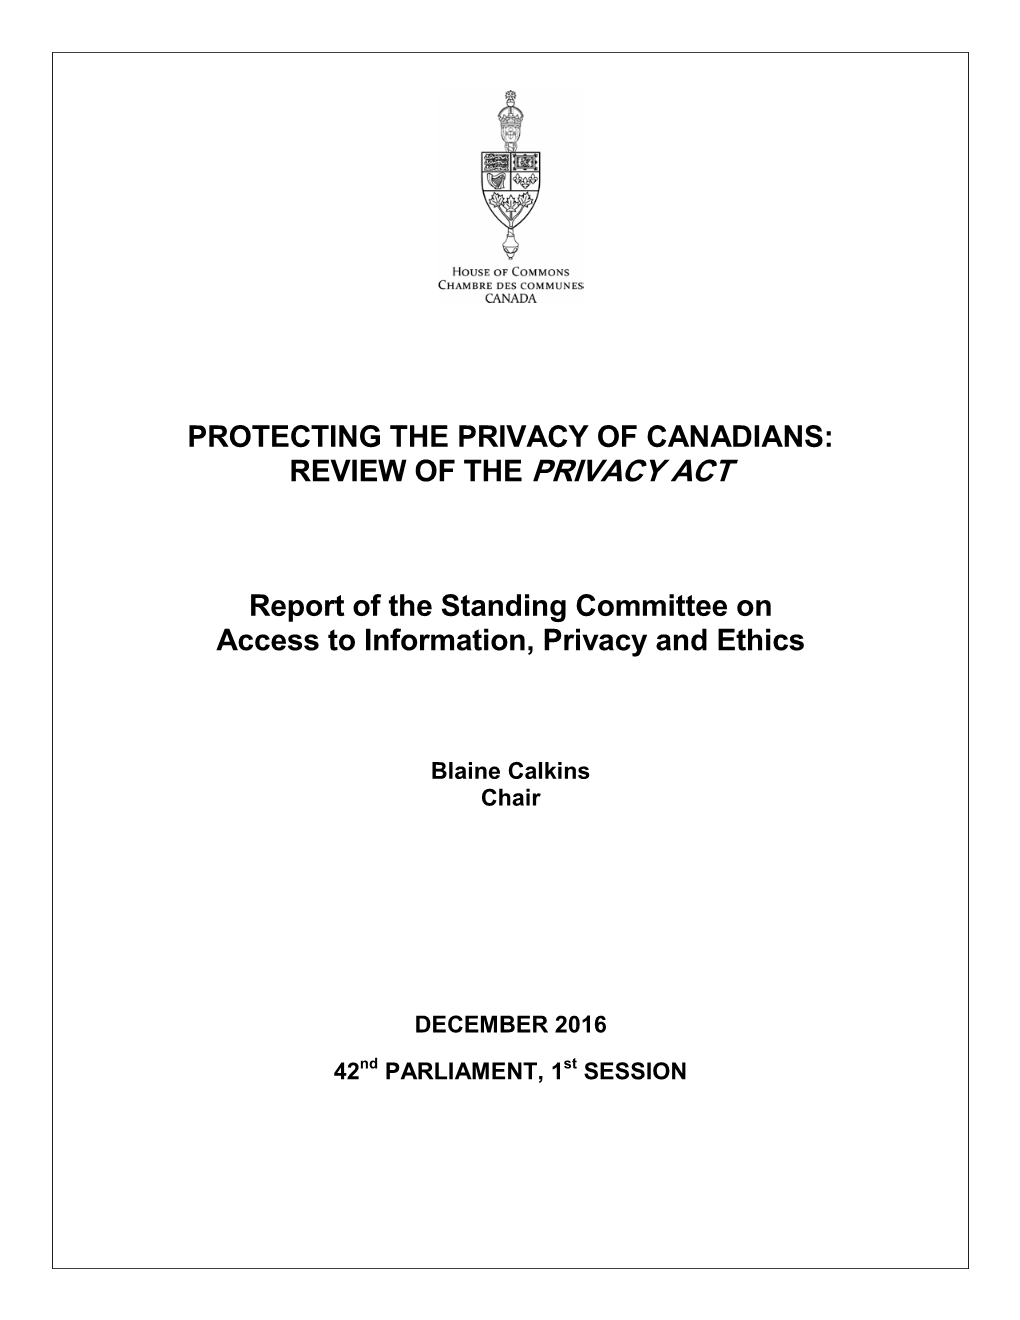 Protecting the Privacy of Canadians: Review of the Privacy Act